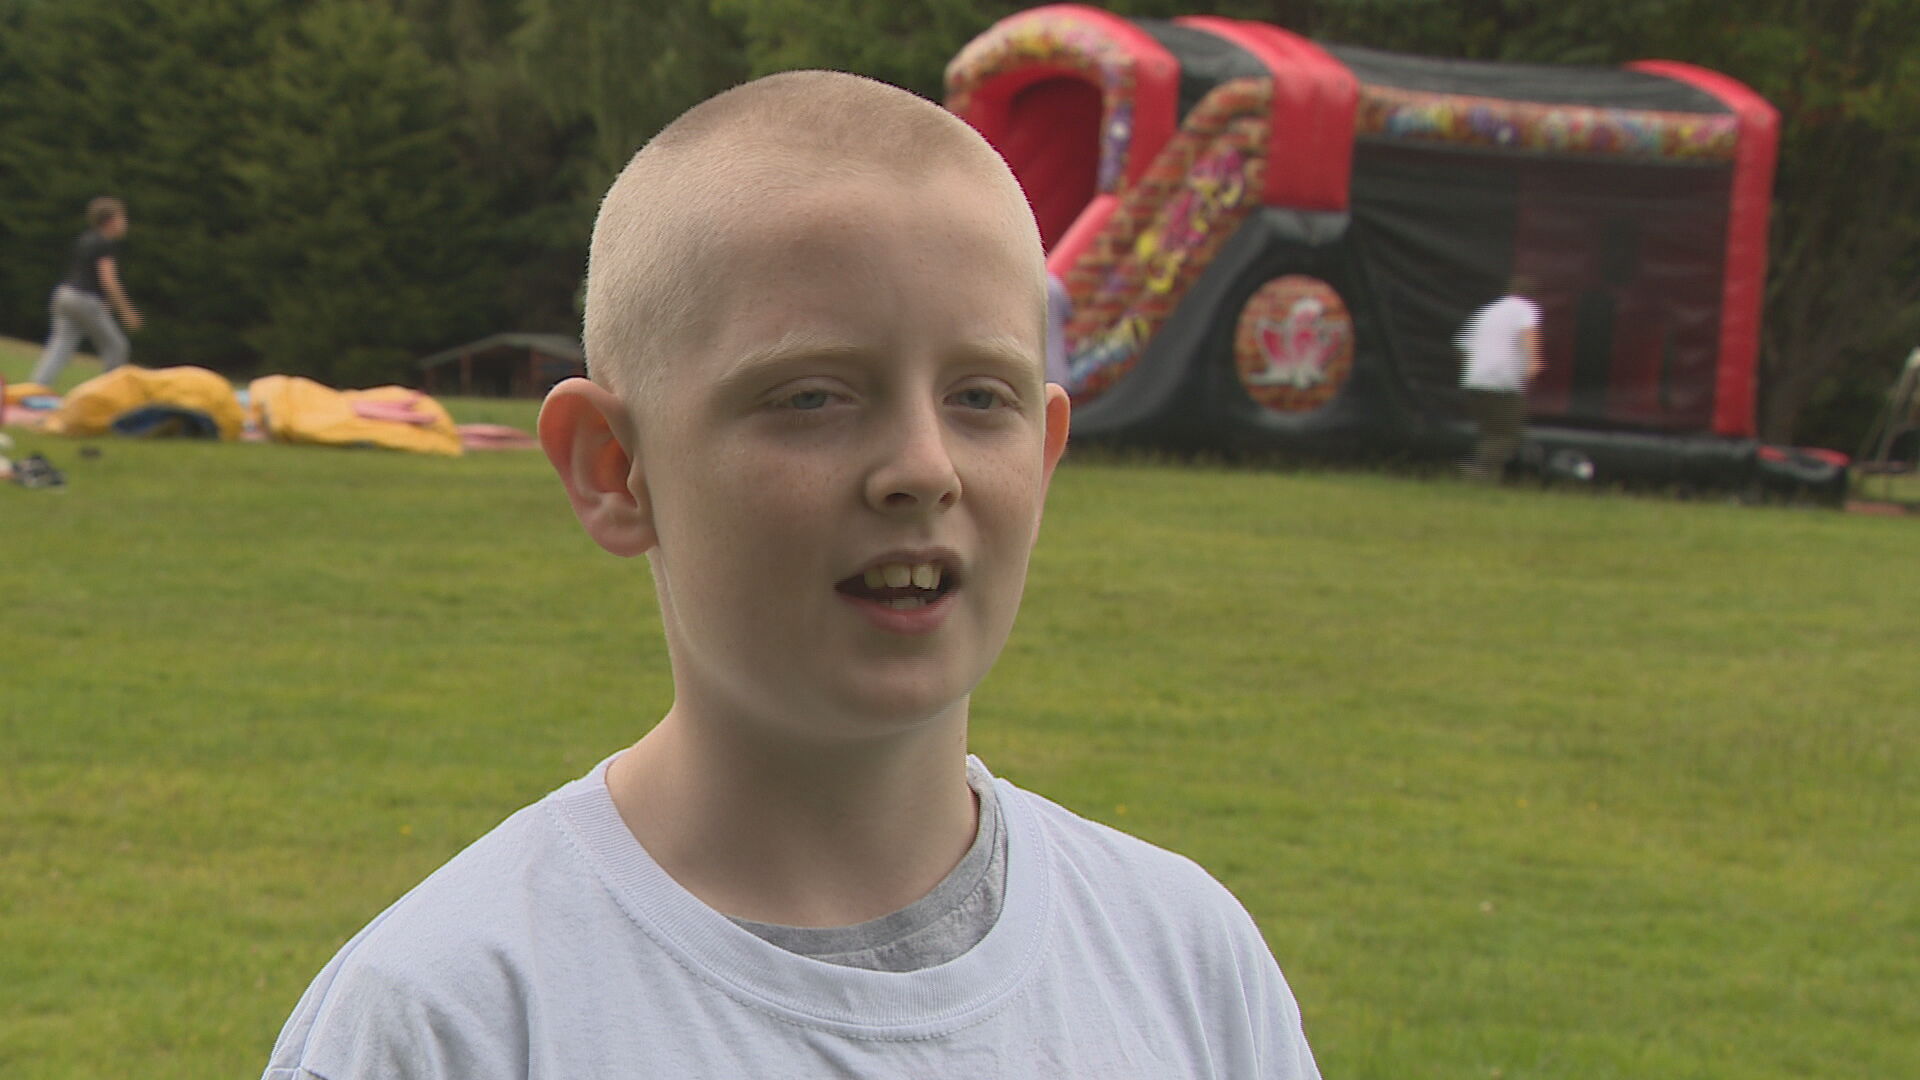 Nathan Campbell, 11, cares for his sister who has ADHD.